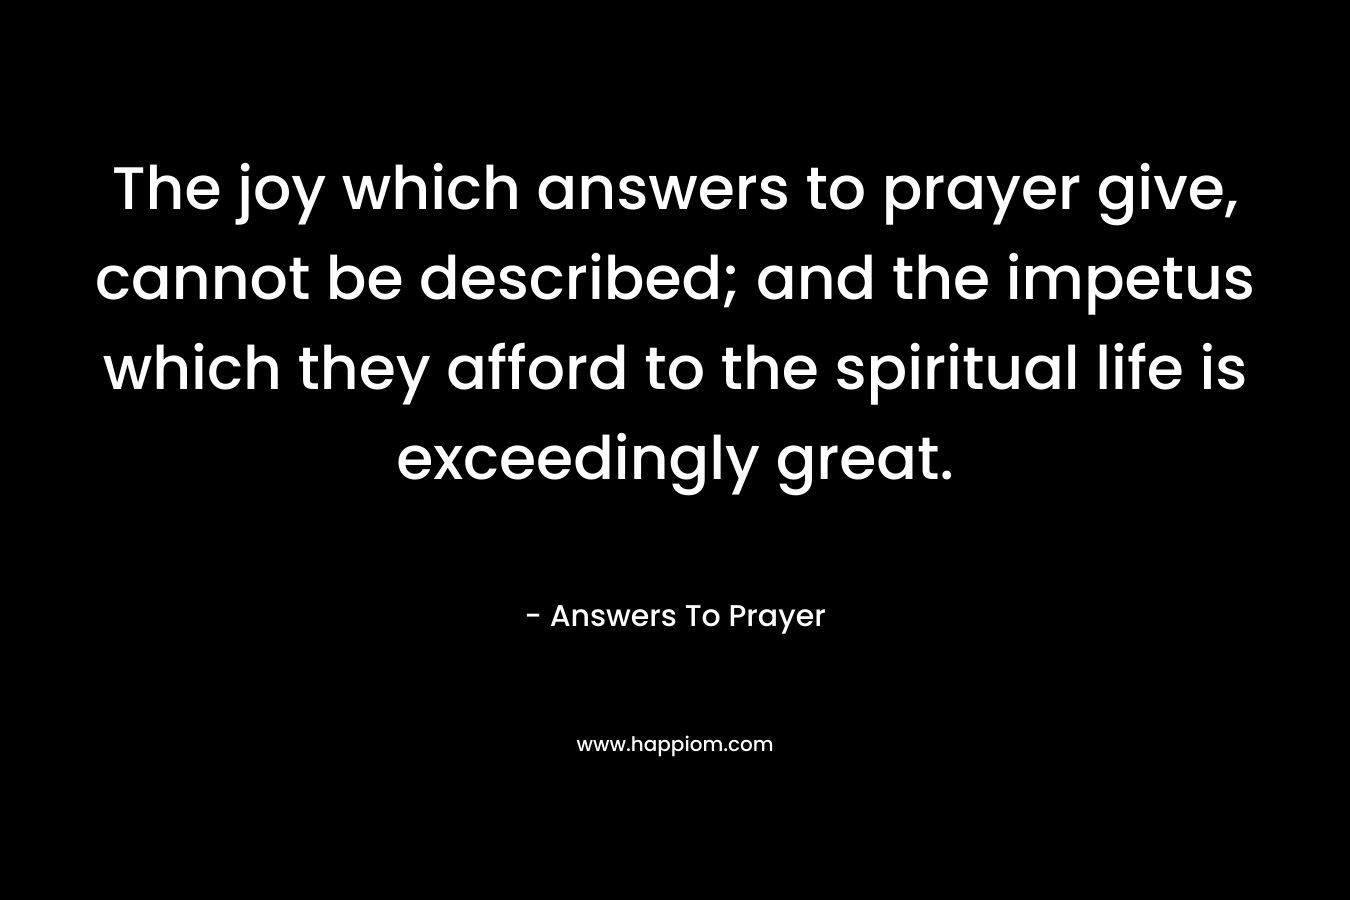 The joy which answers to prayer give, cannot be described; and the impetus which they afford to the spiritual life is exceedingly great.